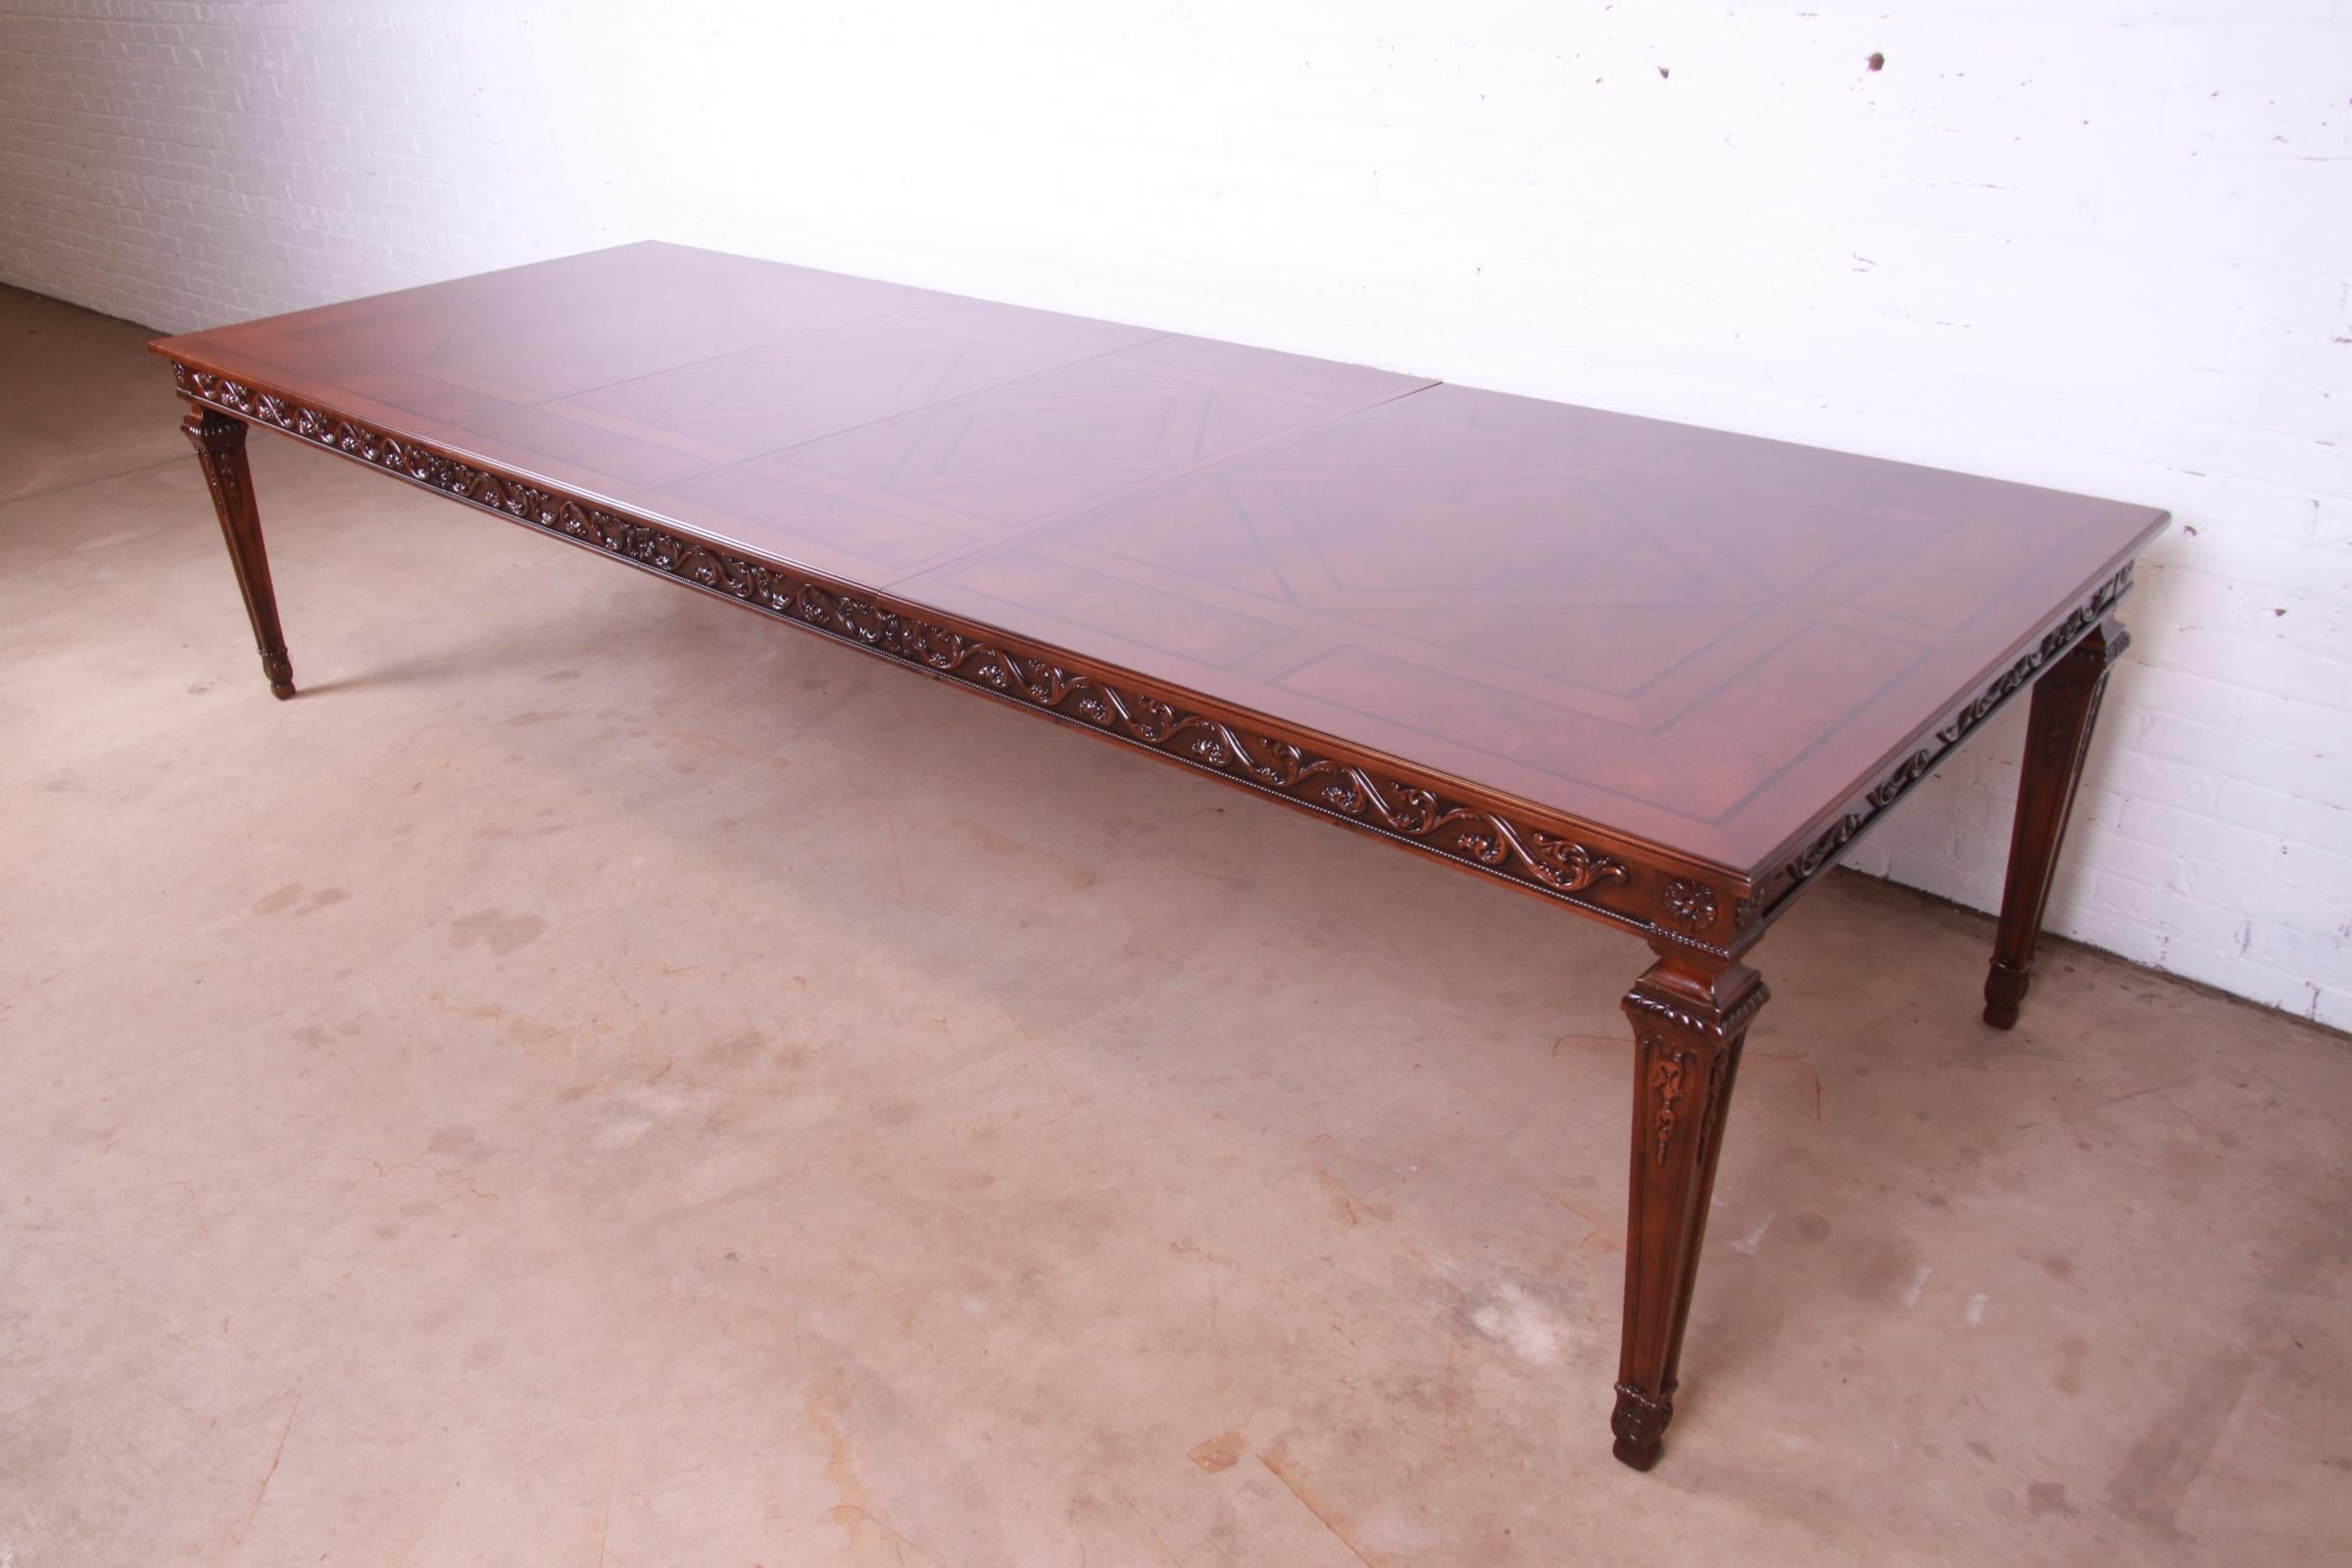 An exceptional Italian Provincial or Mediterranean style extension dining table

By Henredon, 